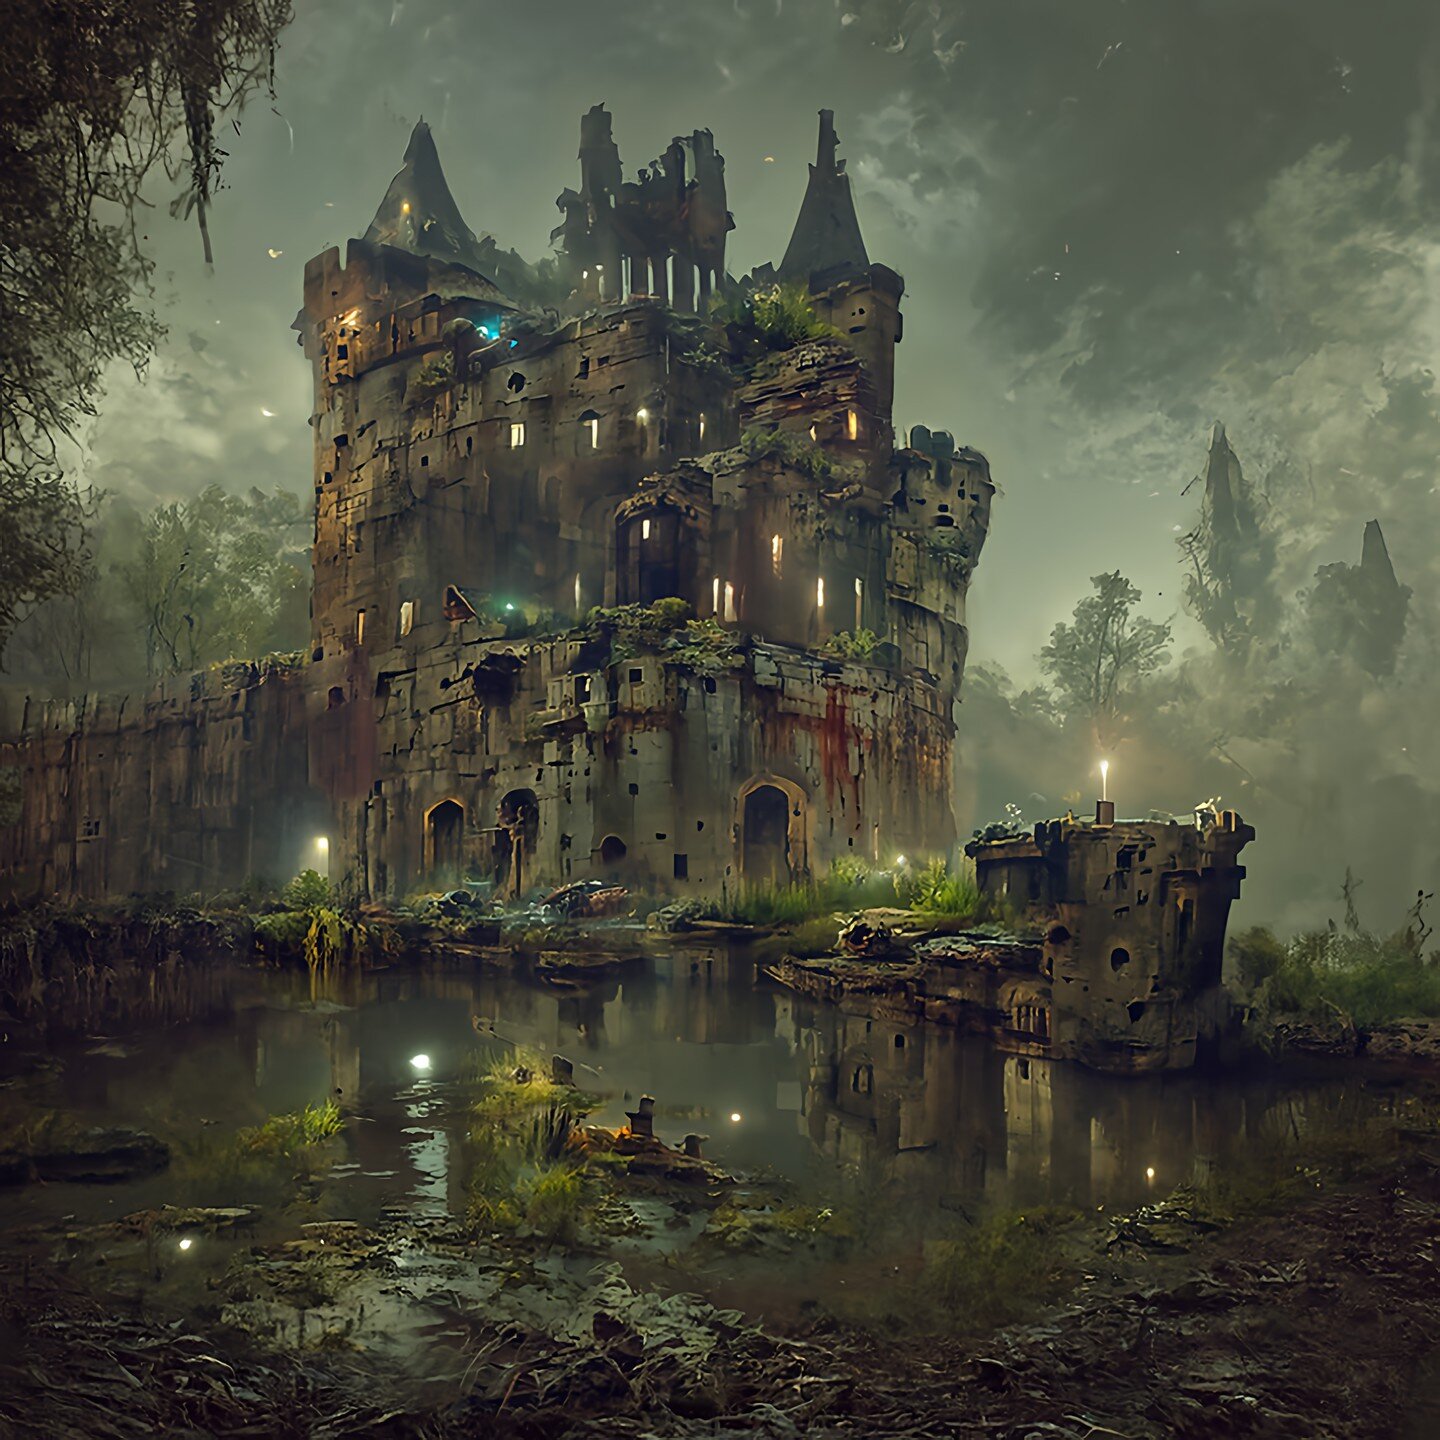 Dowledge Castle (AI Art 🖥️🎨)

Made with #discodiffusion and #stablediffusion 

#castle #ruins #medieval #fantasyart #architecture #kunst #conceptart #ai #aiart #aiartcommunity #generativeart #machinelearning #artificialintelligence #igart #artistso